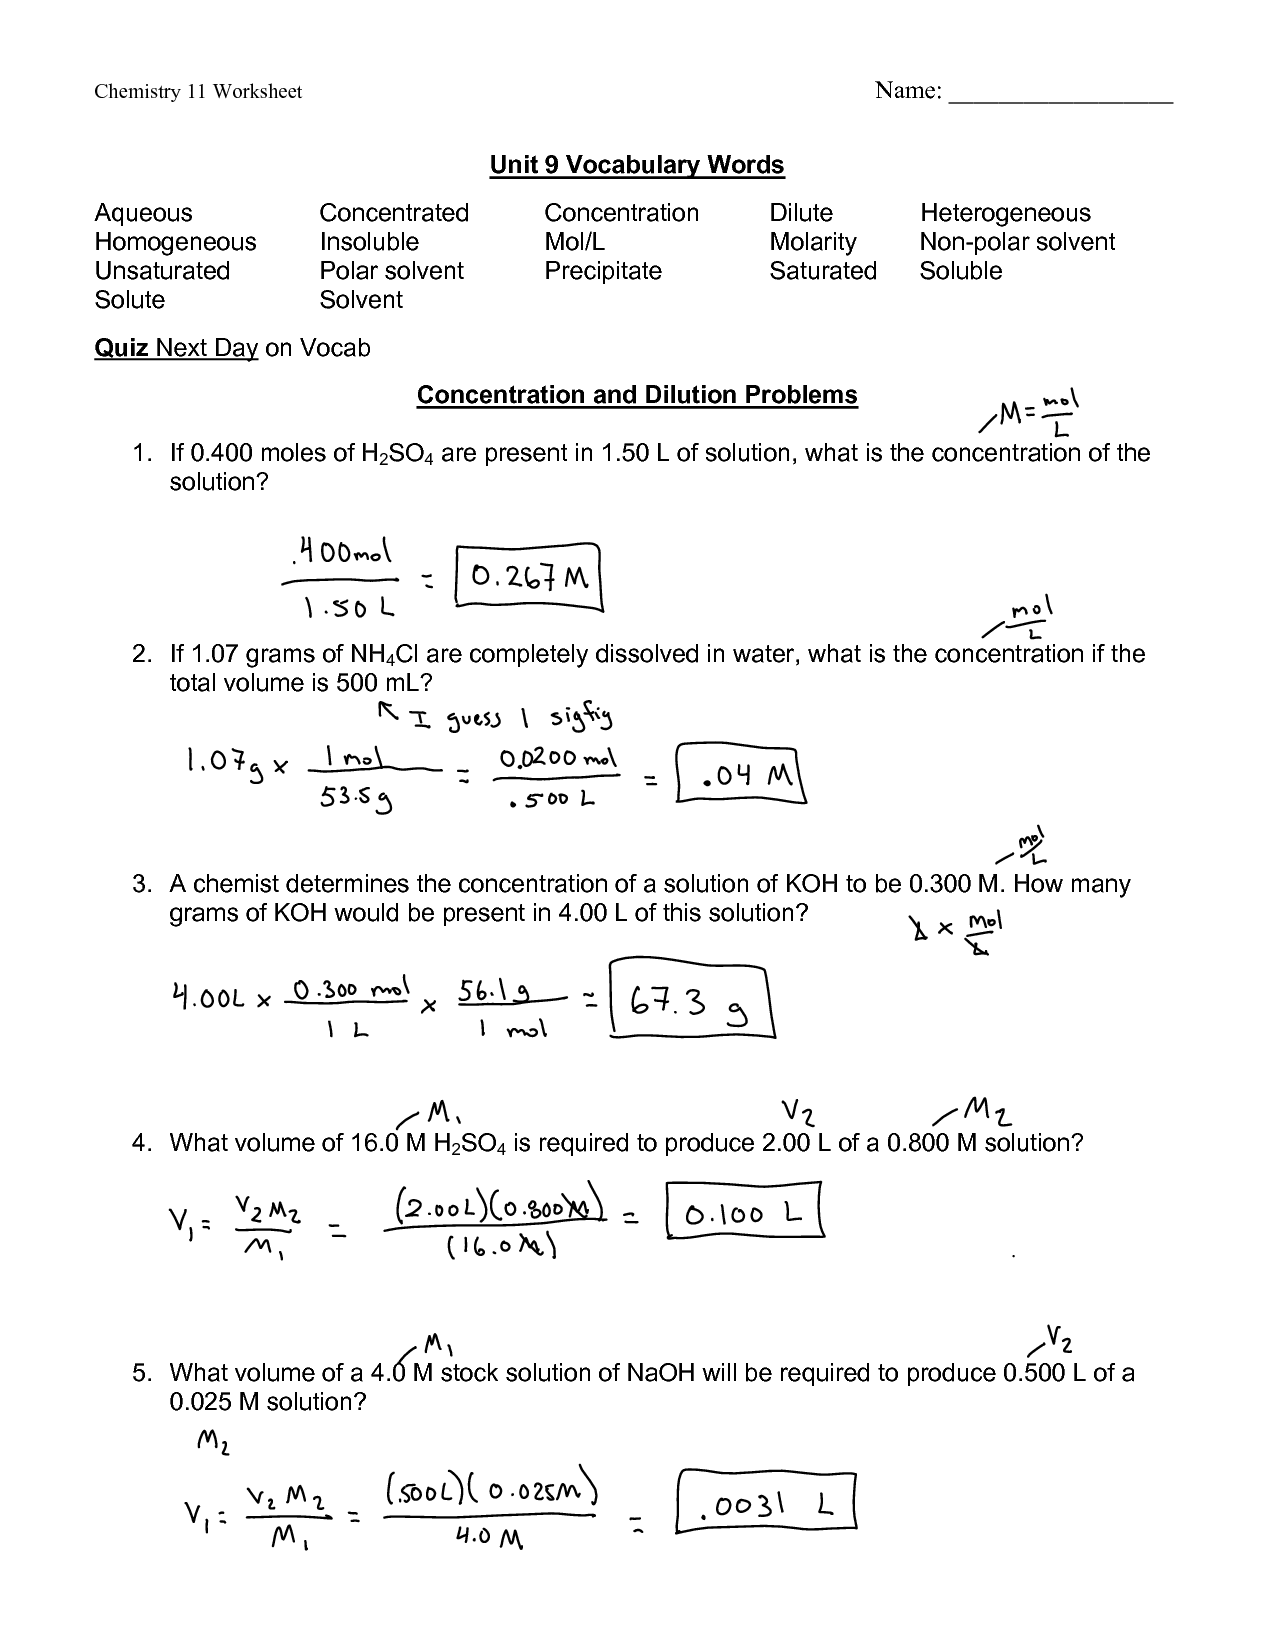 7 Best Images of Molarity Worksheet With Answers - Molality and ...